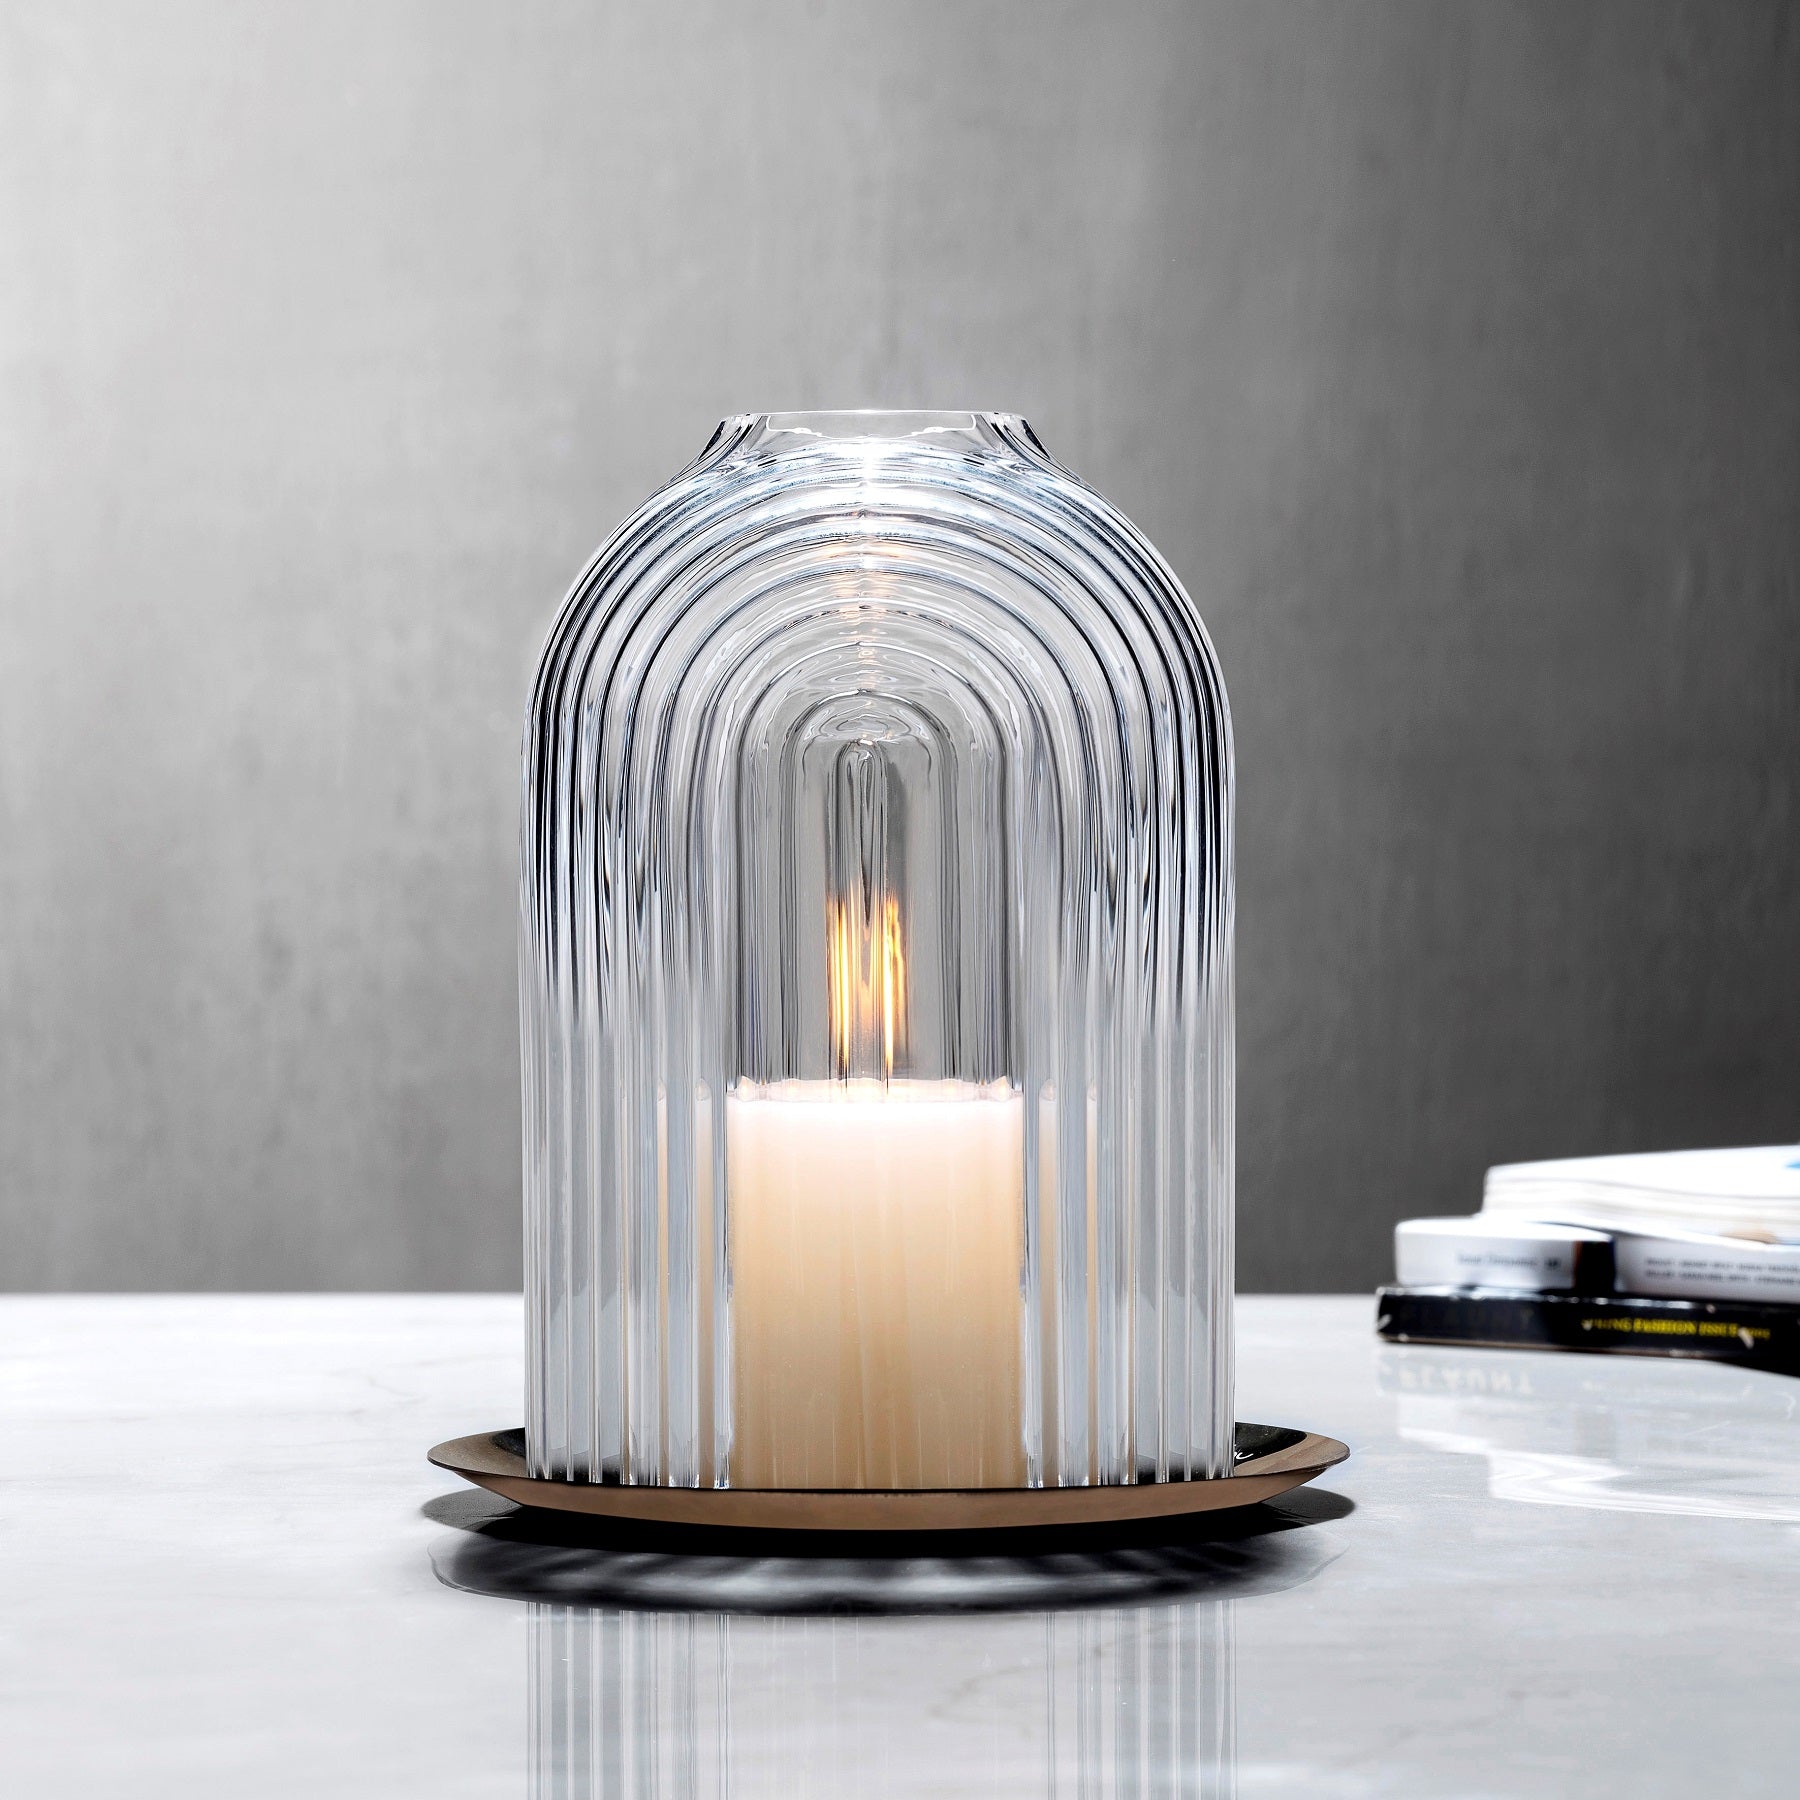 Lead-free crystal candle holder Ilo, a dome shaped candle holder with rippled glass effect, with candle presented on a table with grey tones